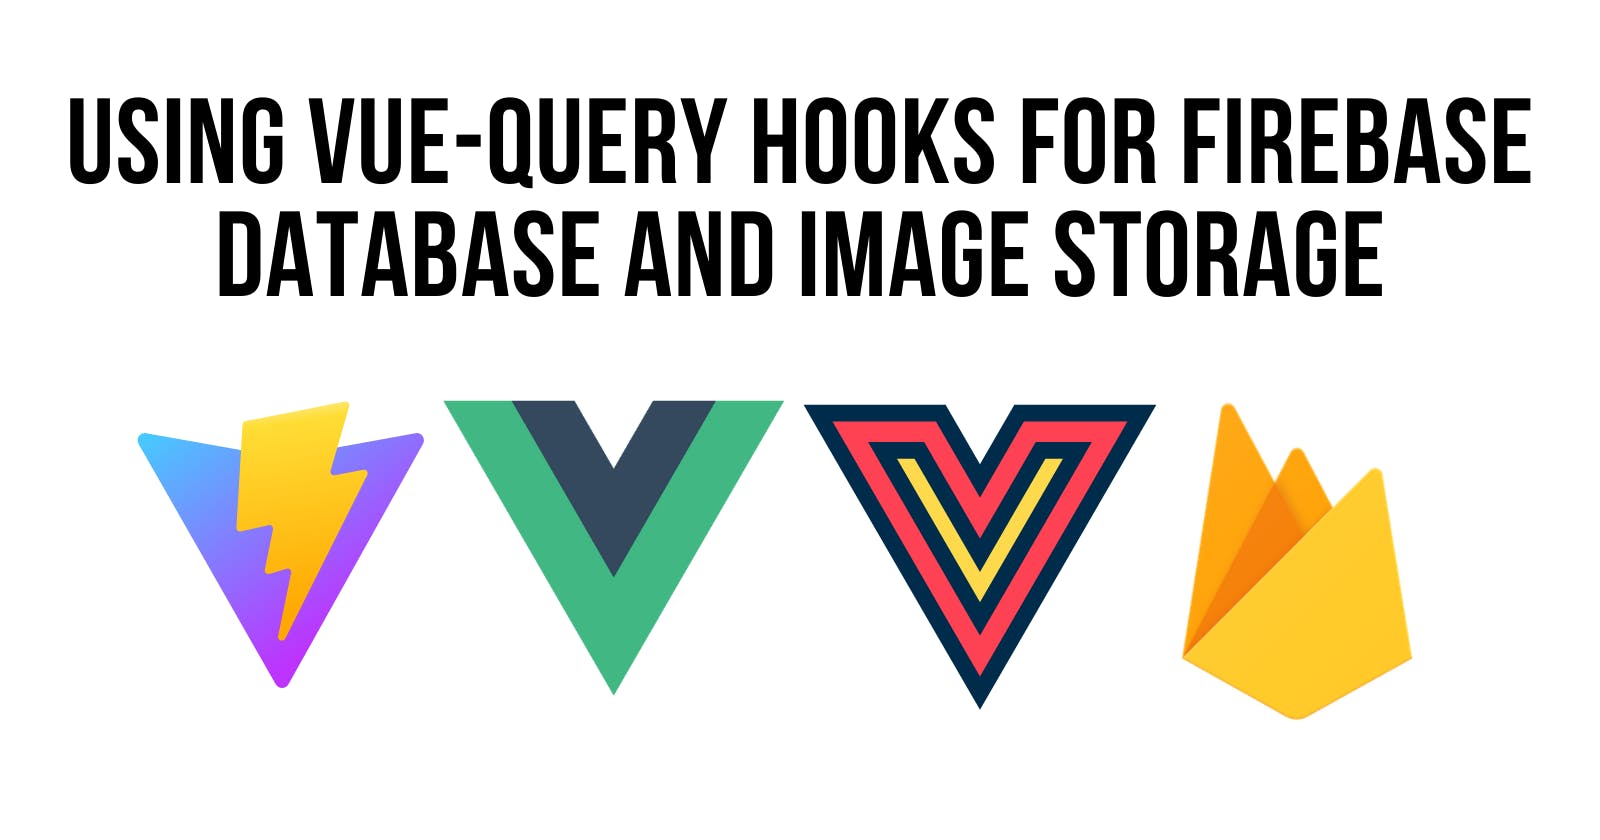 Using Vue Query Hooks For Firebase Database and Image Storage, Mutations and Queries in VueJS